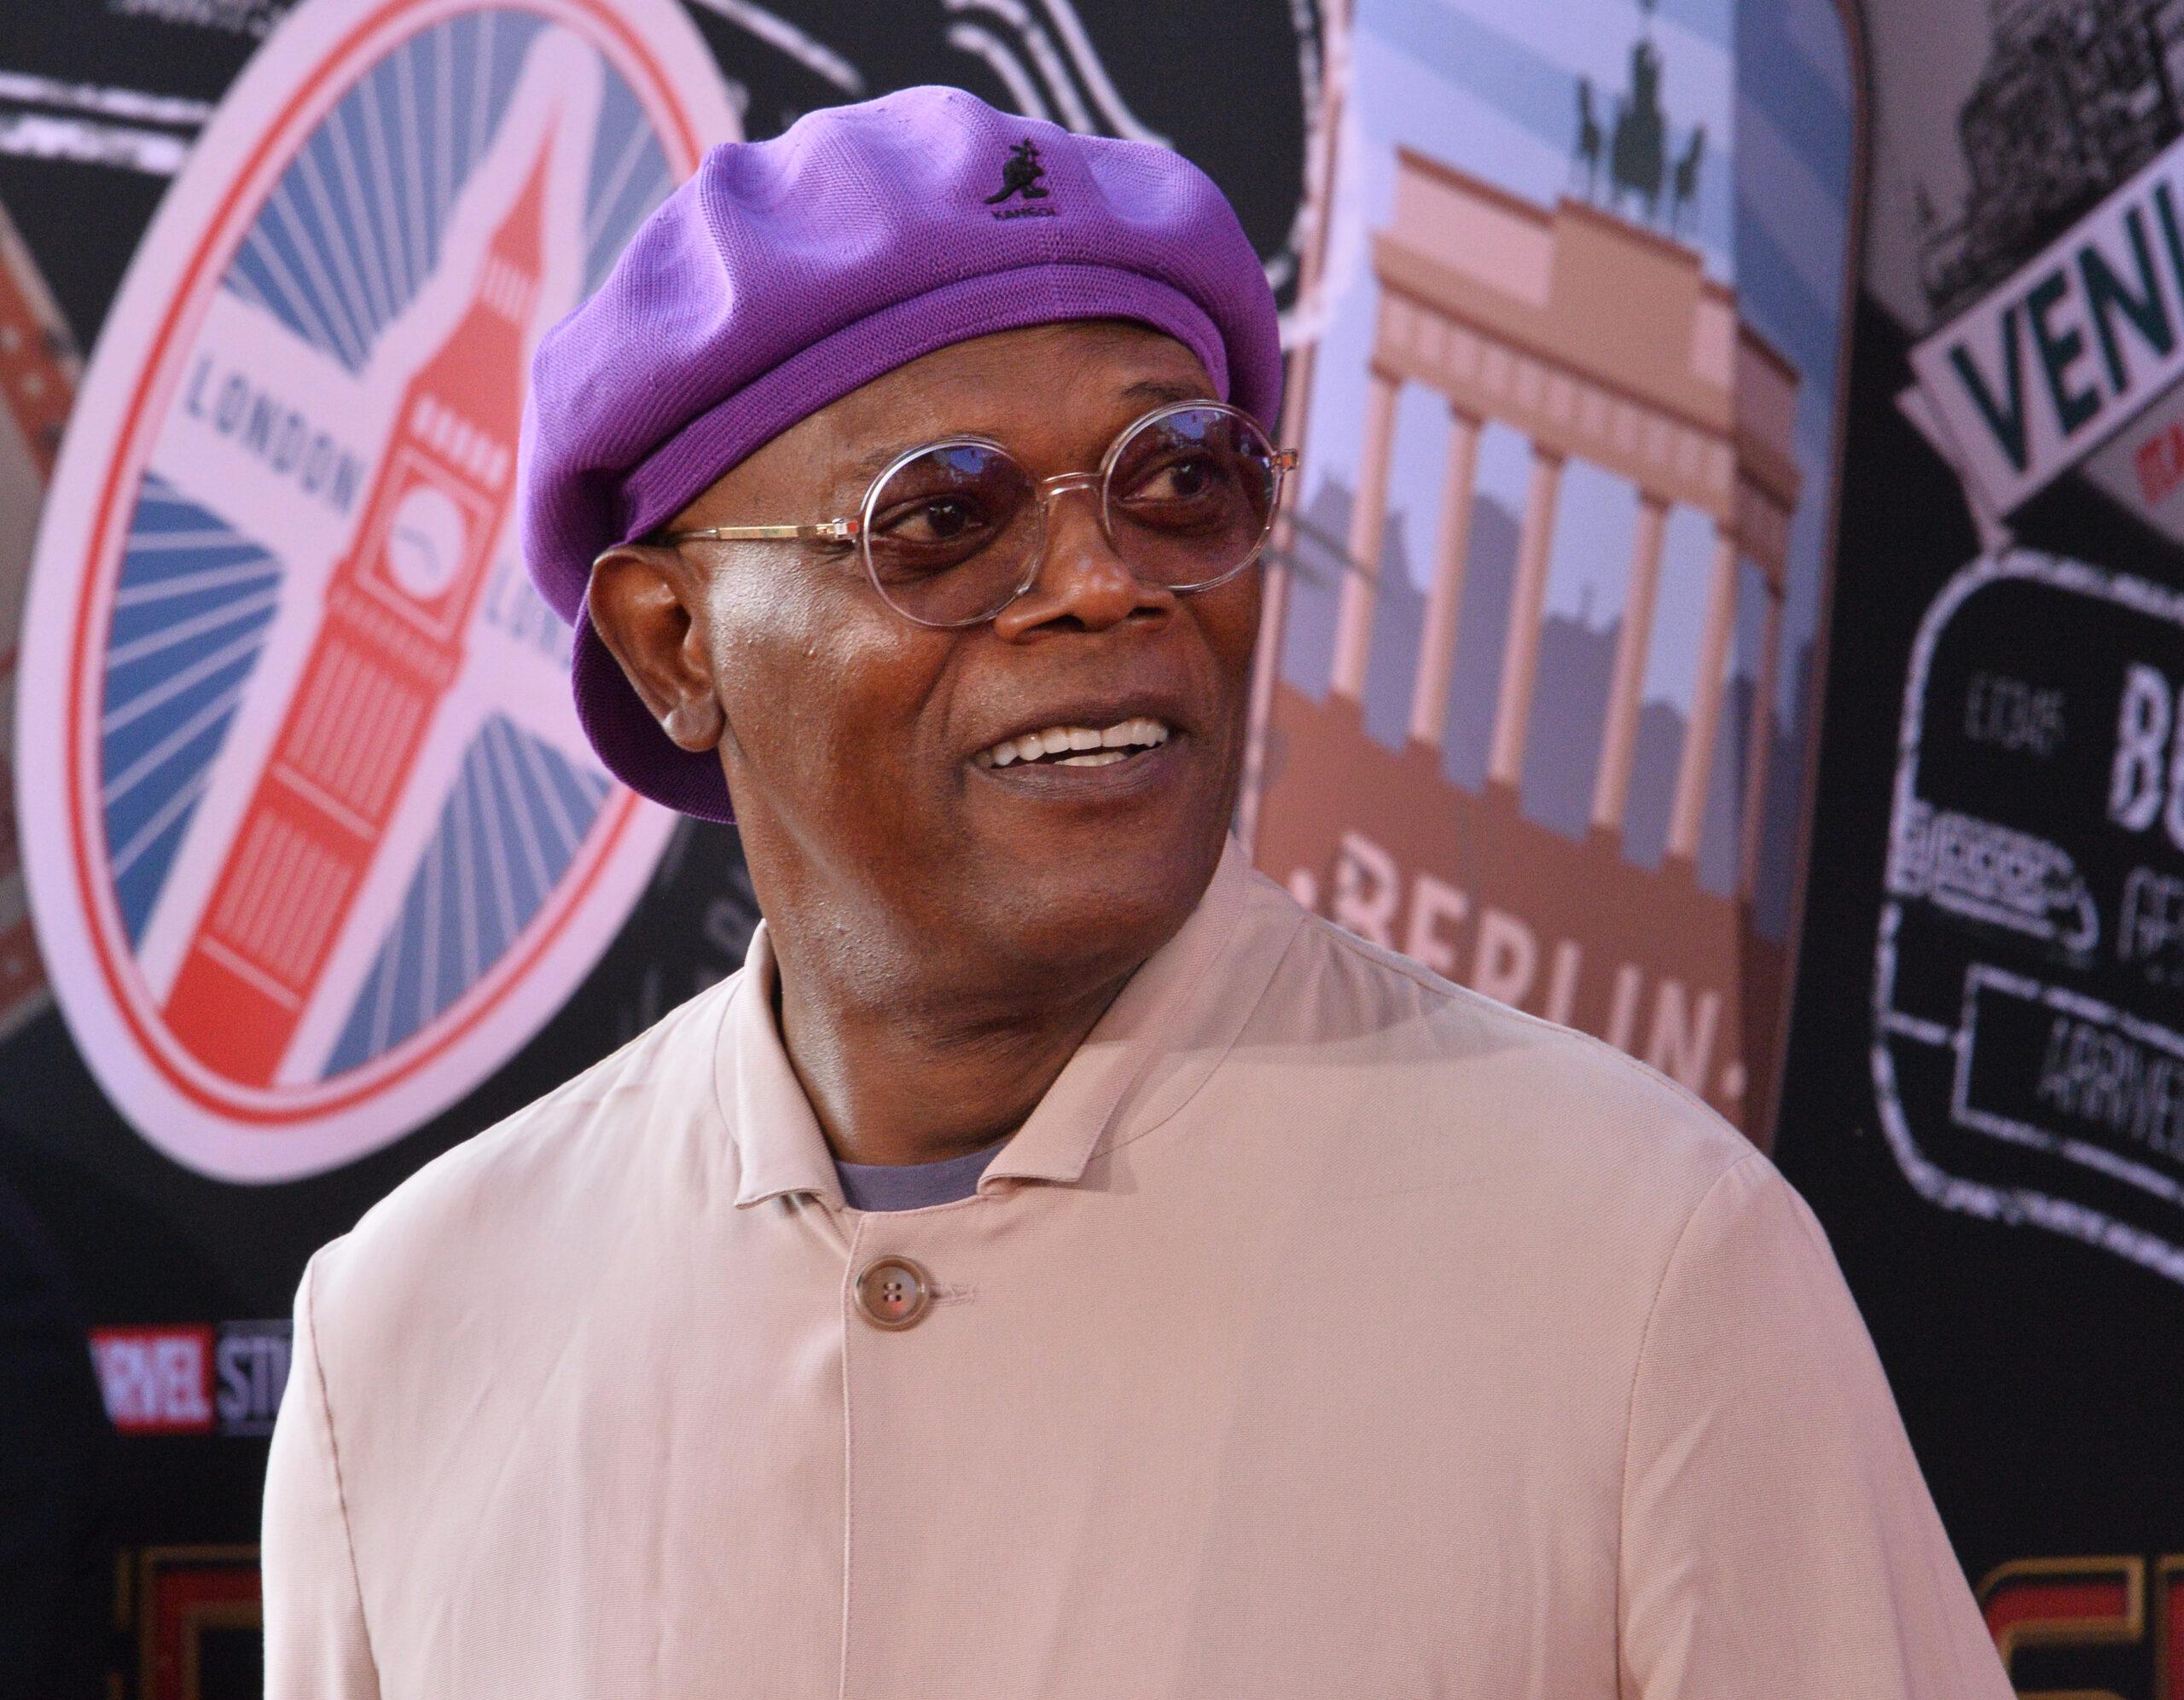 Samuel L. Jackson at the "Spider-Man: Far From Home" premiere in Los Angeles